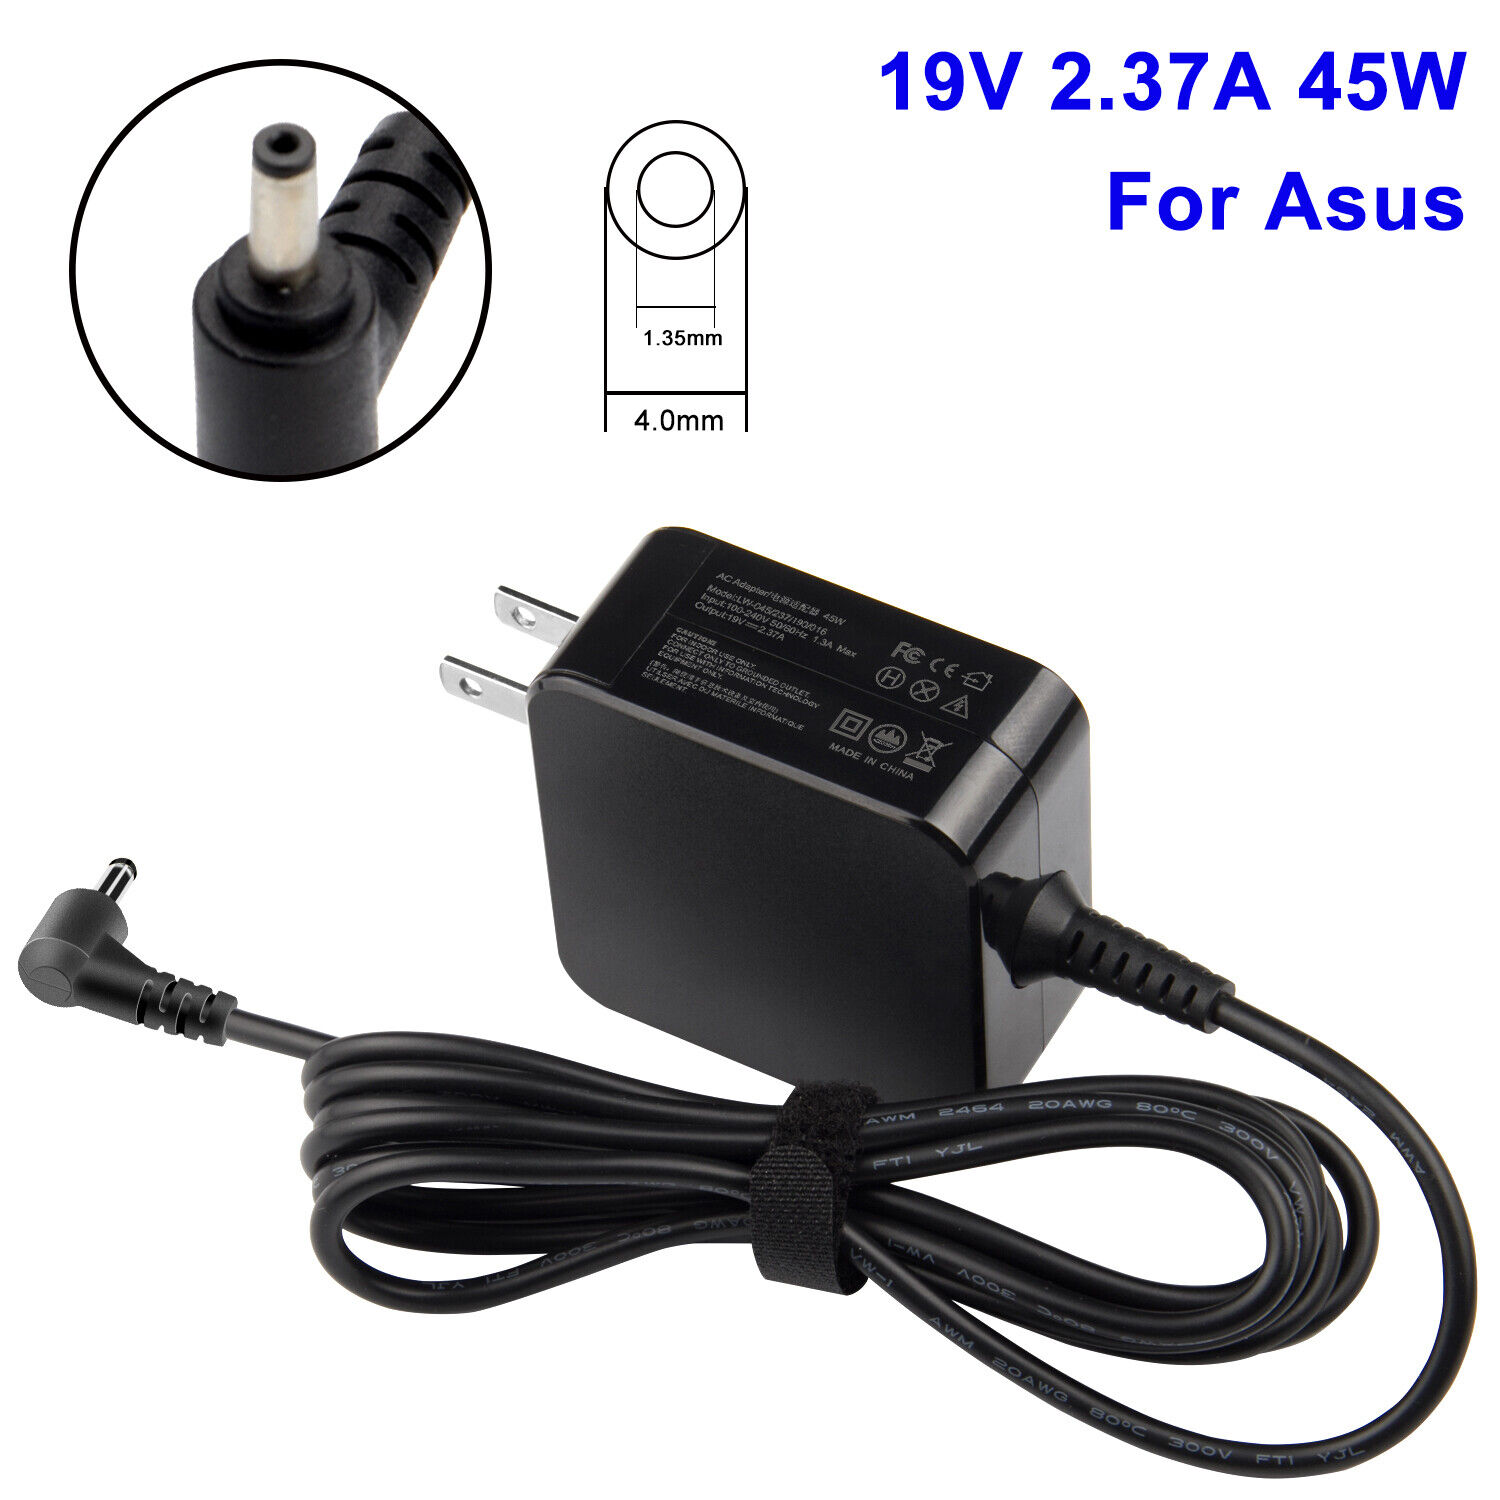 45W Adapter Charger For Asus VivoBook flip 14 15 17 F412 F512 X512 Power Supply